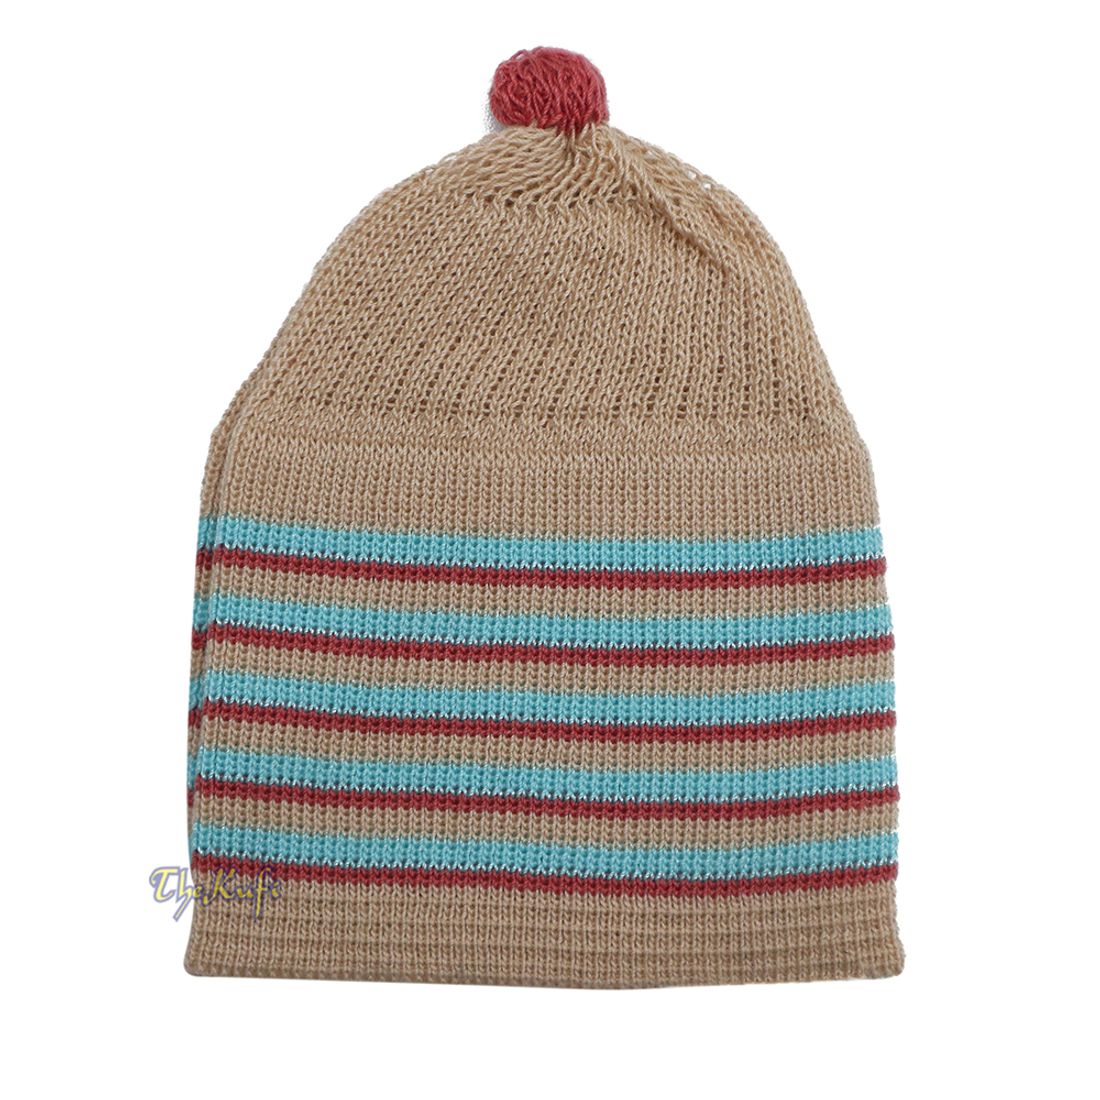 Beige dengan Turquoise and Maroon Lines Baby or Infant Kufi Pompom Stretchable Beanie